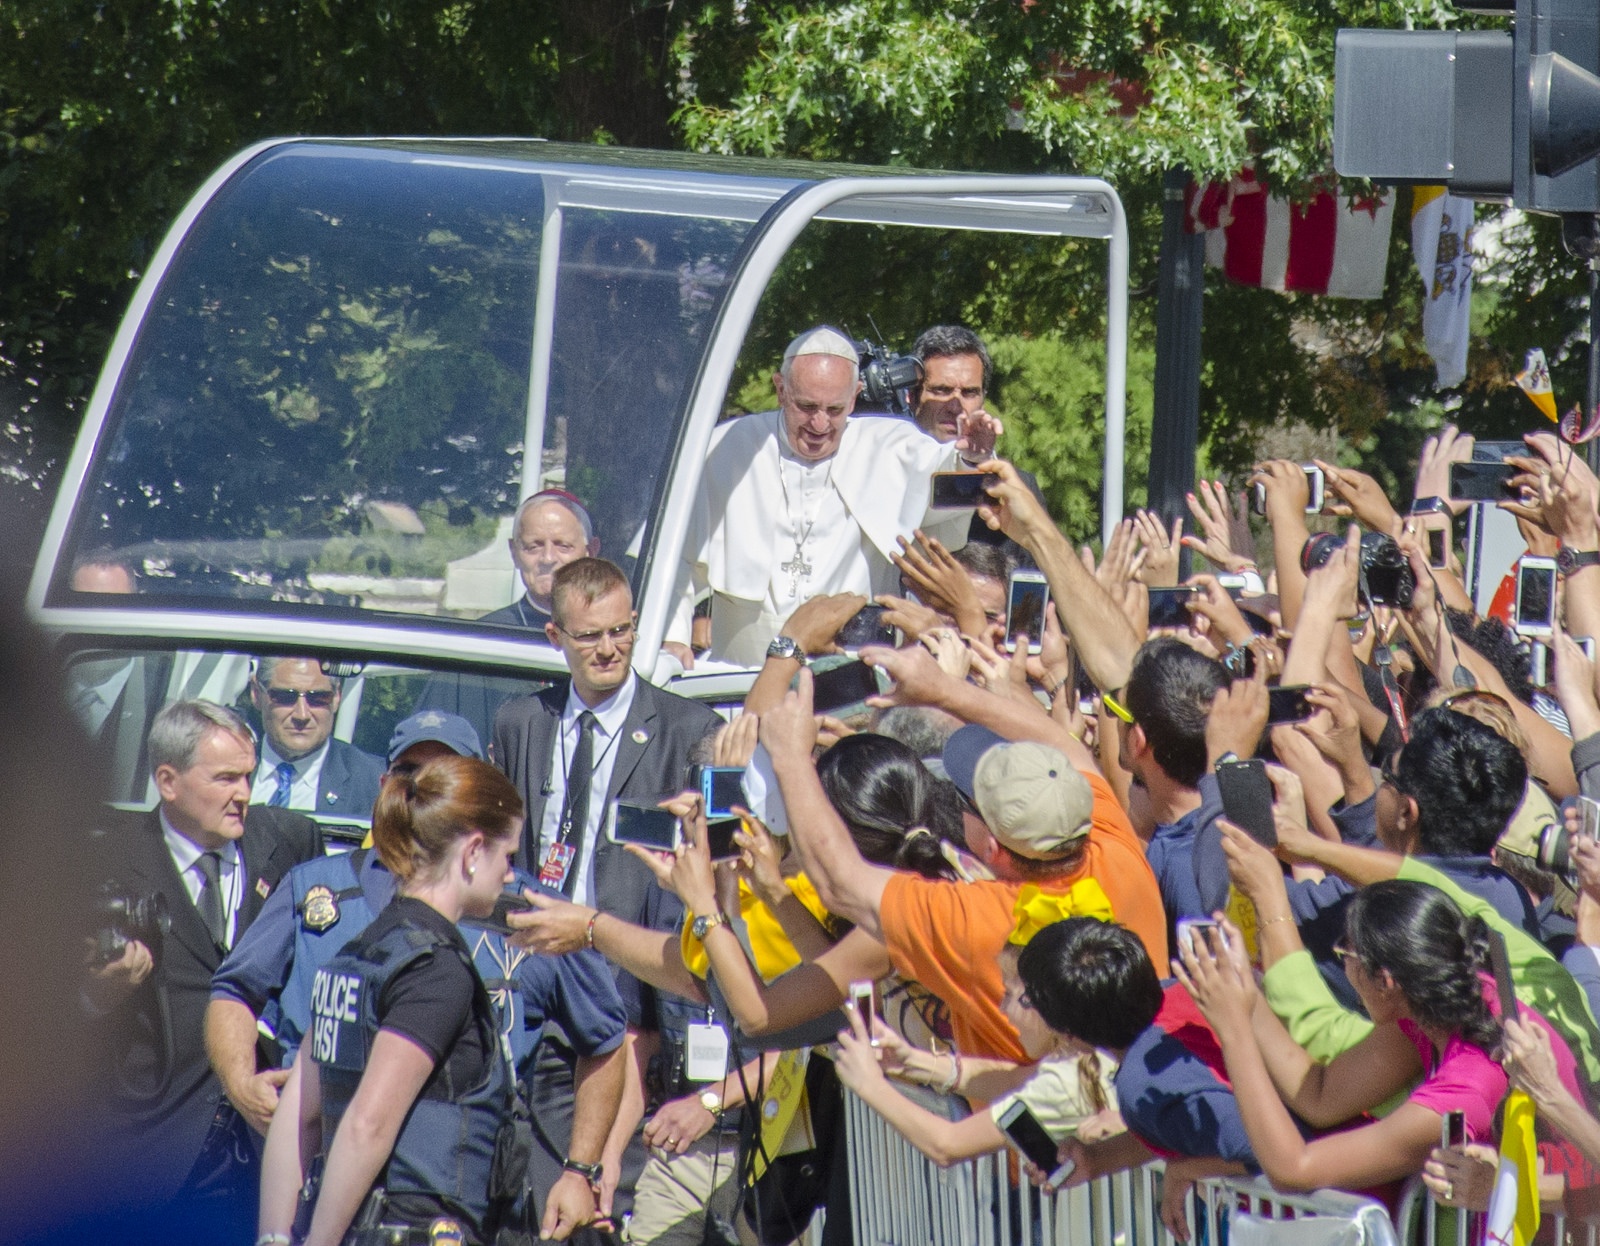 popes-arrival-in-america-greeted-by-a-sea-of-smartphones-image-cultofandroidcomwp-contentuploads20150921646304072_7f298bf6fa_h-jpg